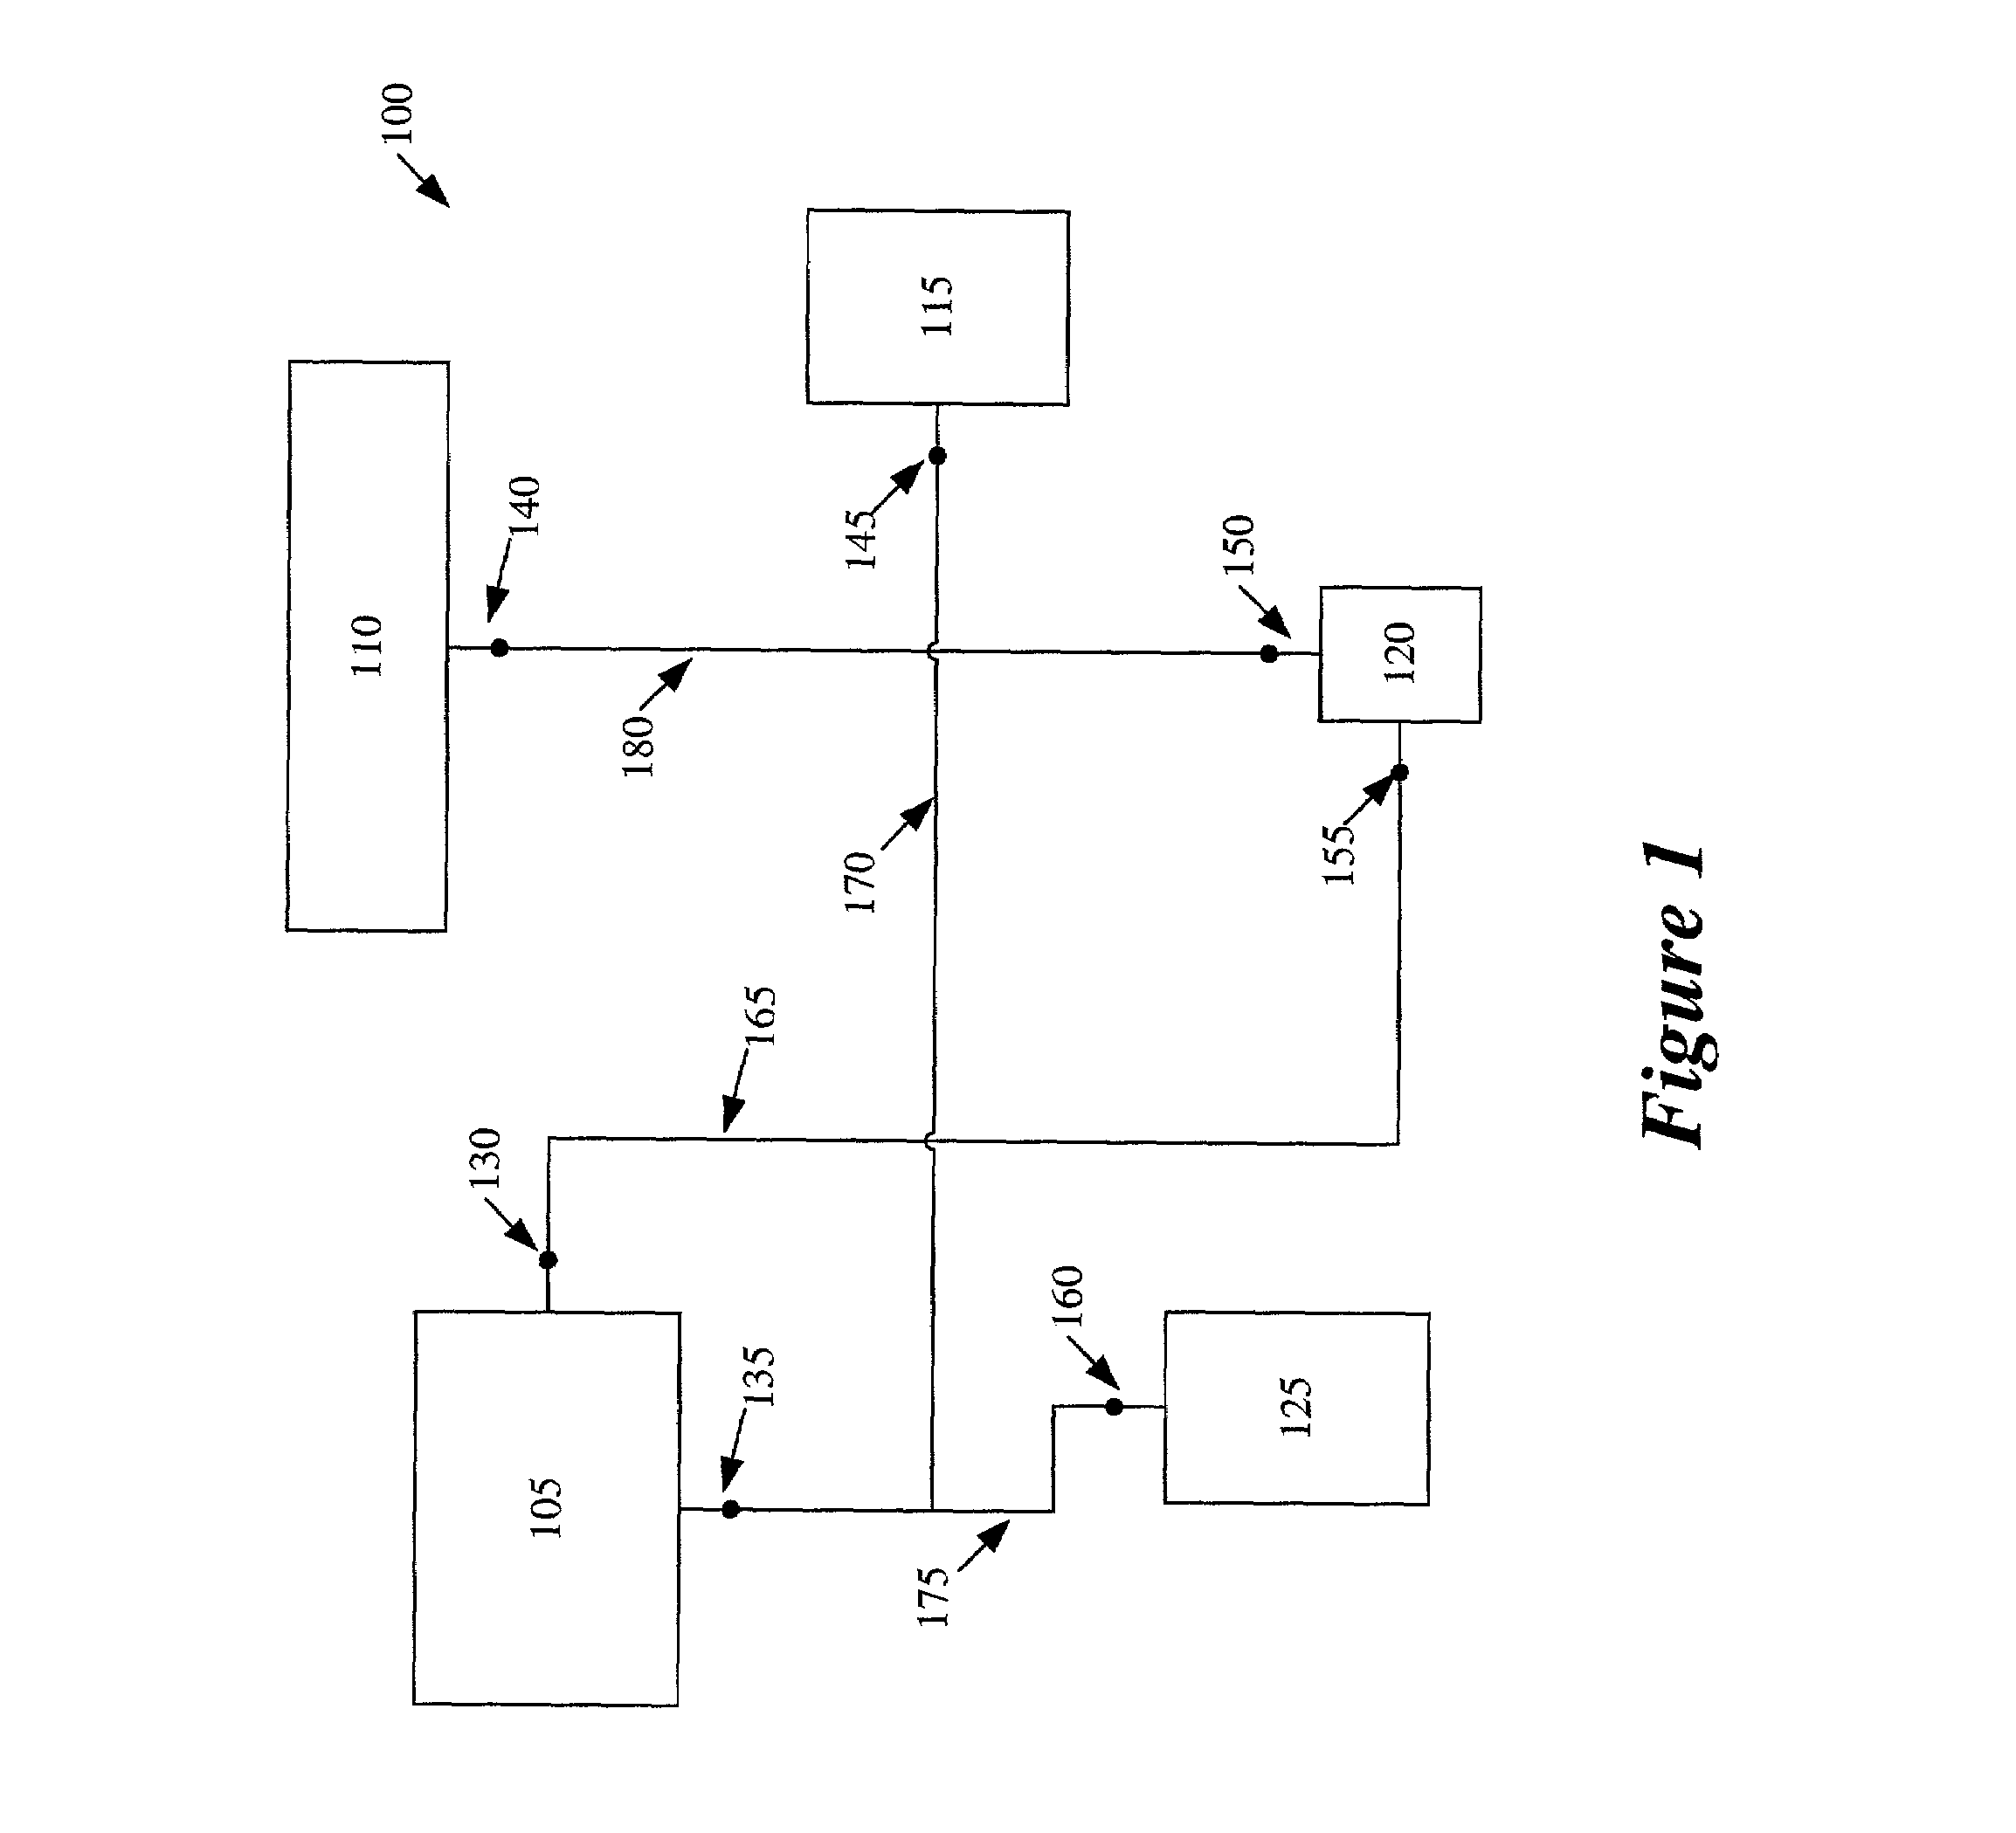 Method and apparatus for considering diagonal wiring in placement